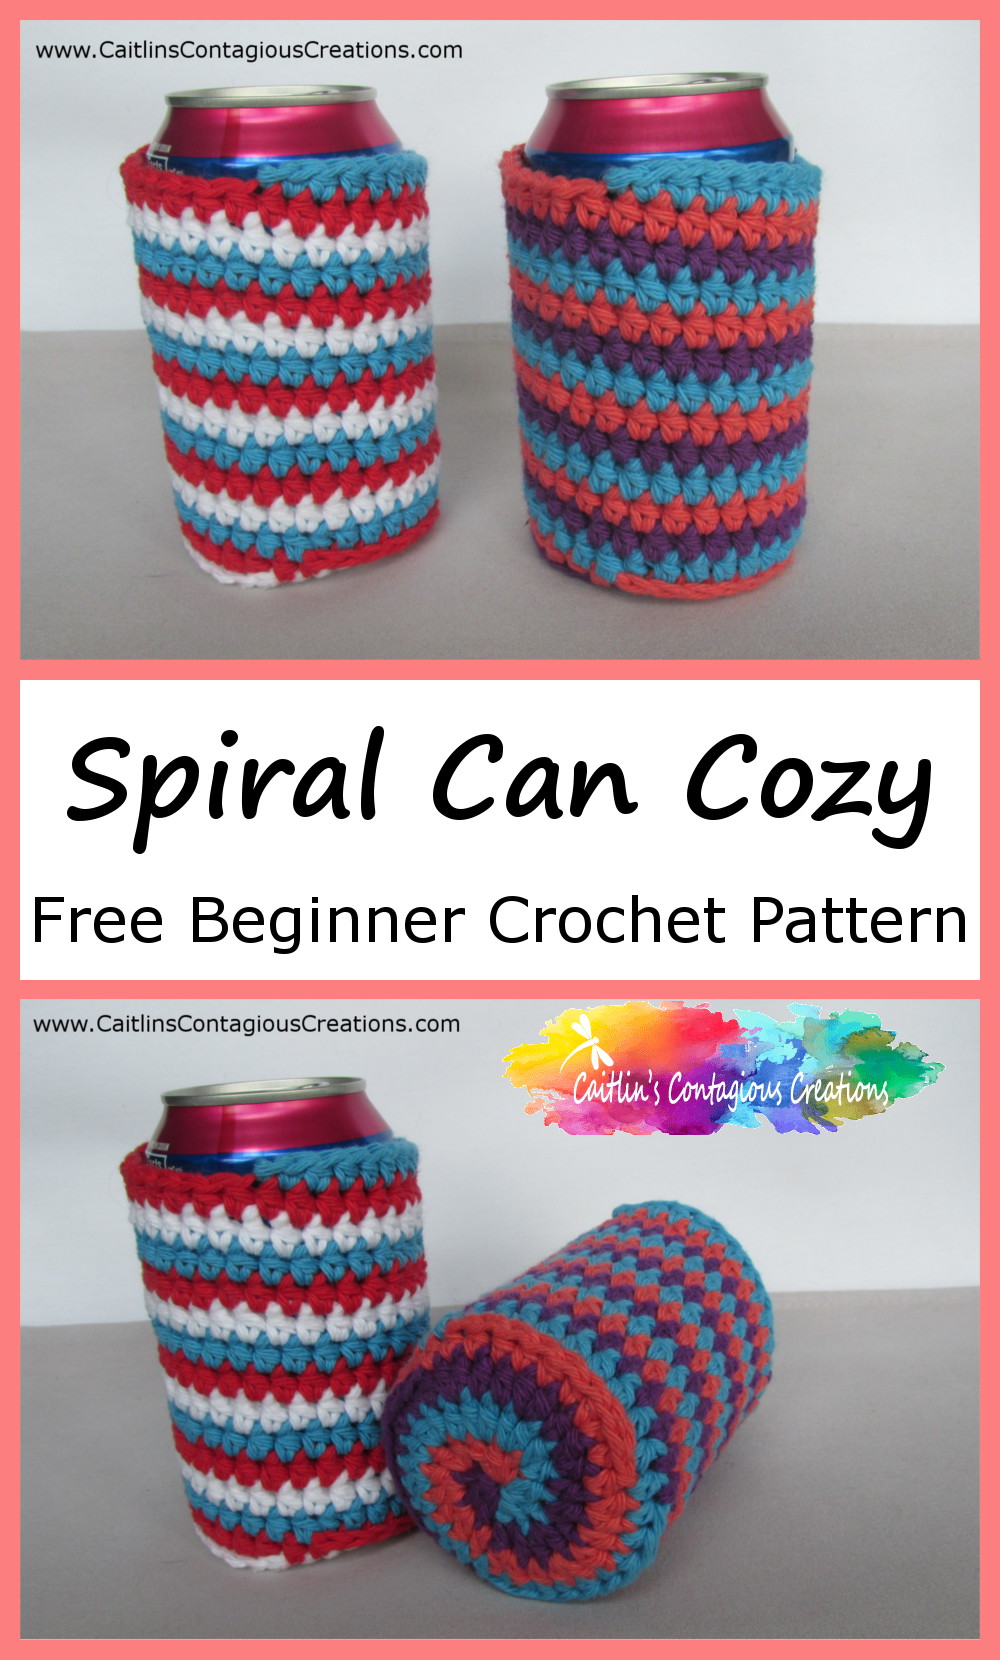 Spiral Can Cozy Crochet Pattern - Caitlin's Contagious Creations